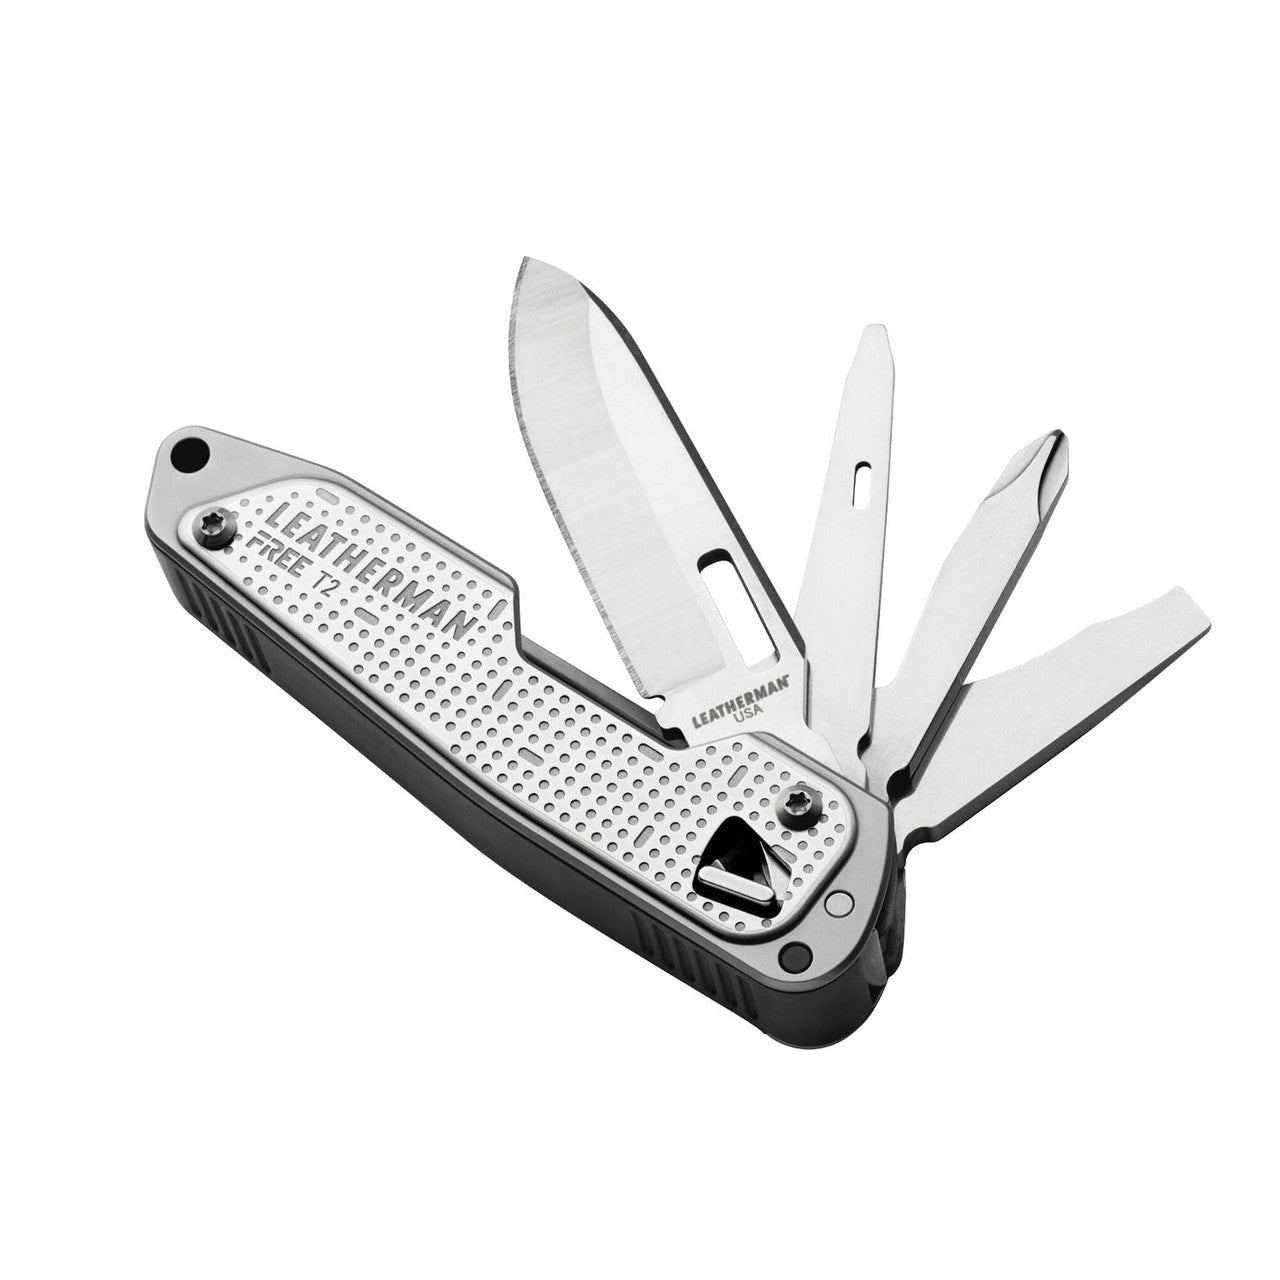 Knives & Tools - Leatherman FREE T2 Knife W/ Magnetic Open/Close